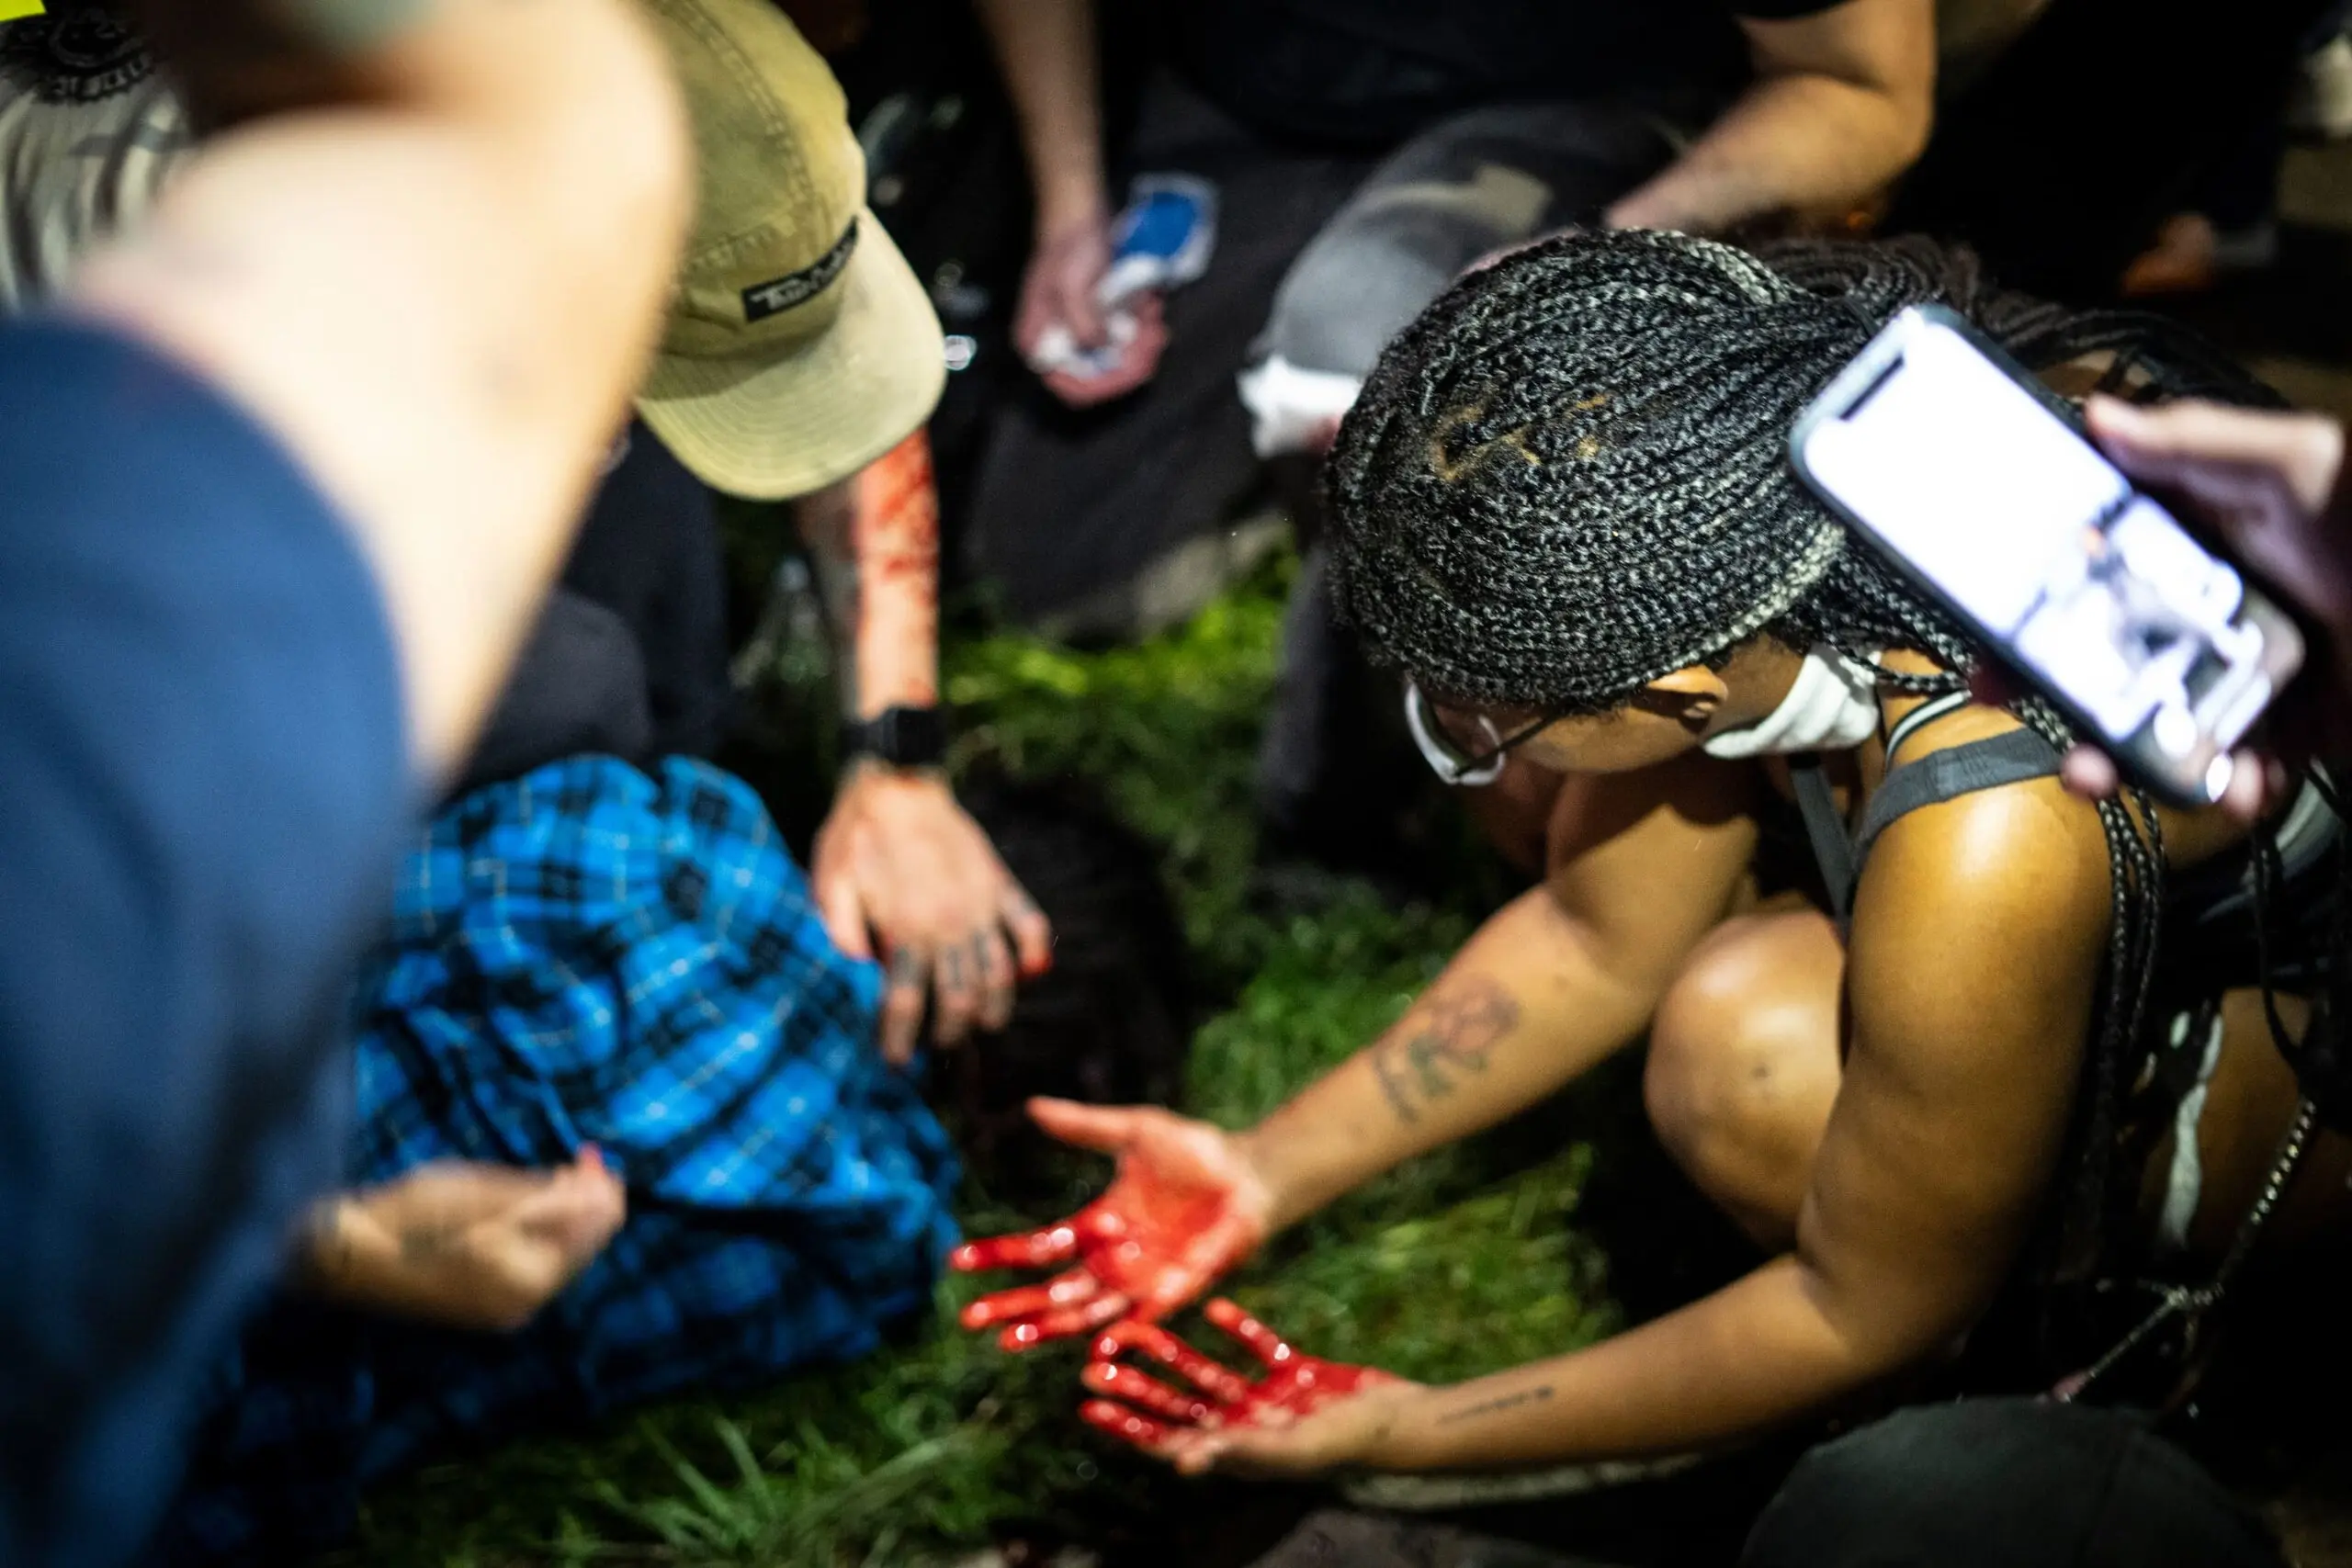 Street medics and protesters tend to Justin Howell moments after police shot them with bean-bag rounds.